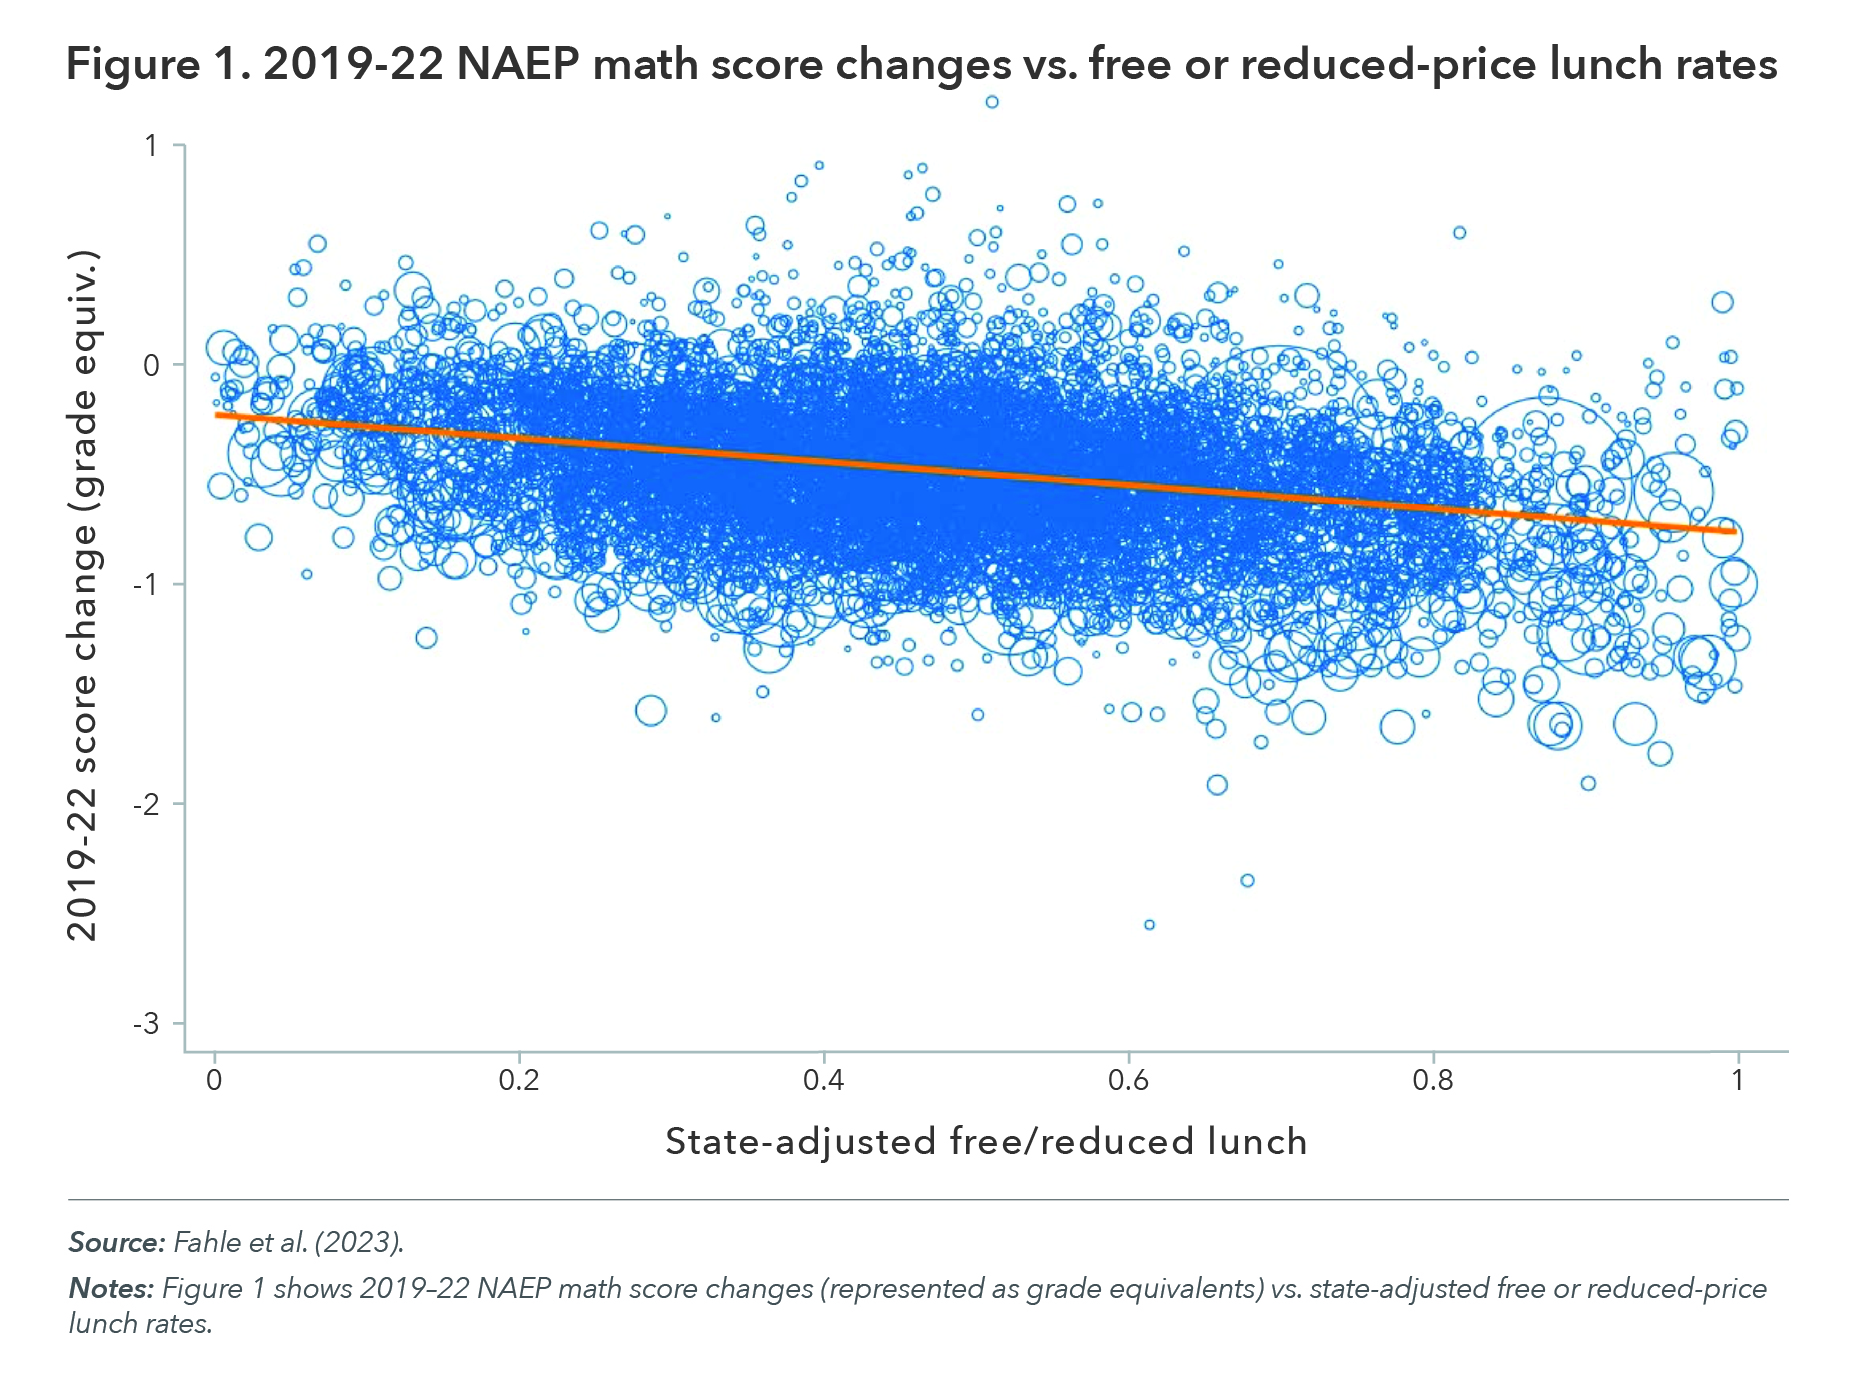 Figure 1: 2019-2022 NAEP Math Score Changes vs. Free or Reduced-Price Lunch Rates